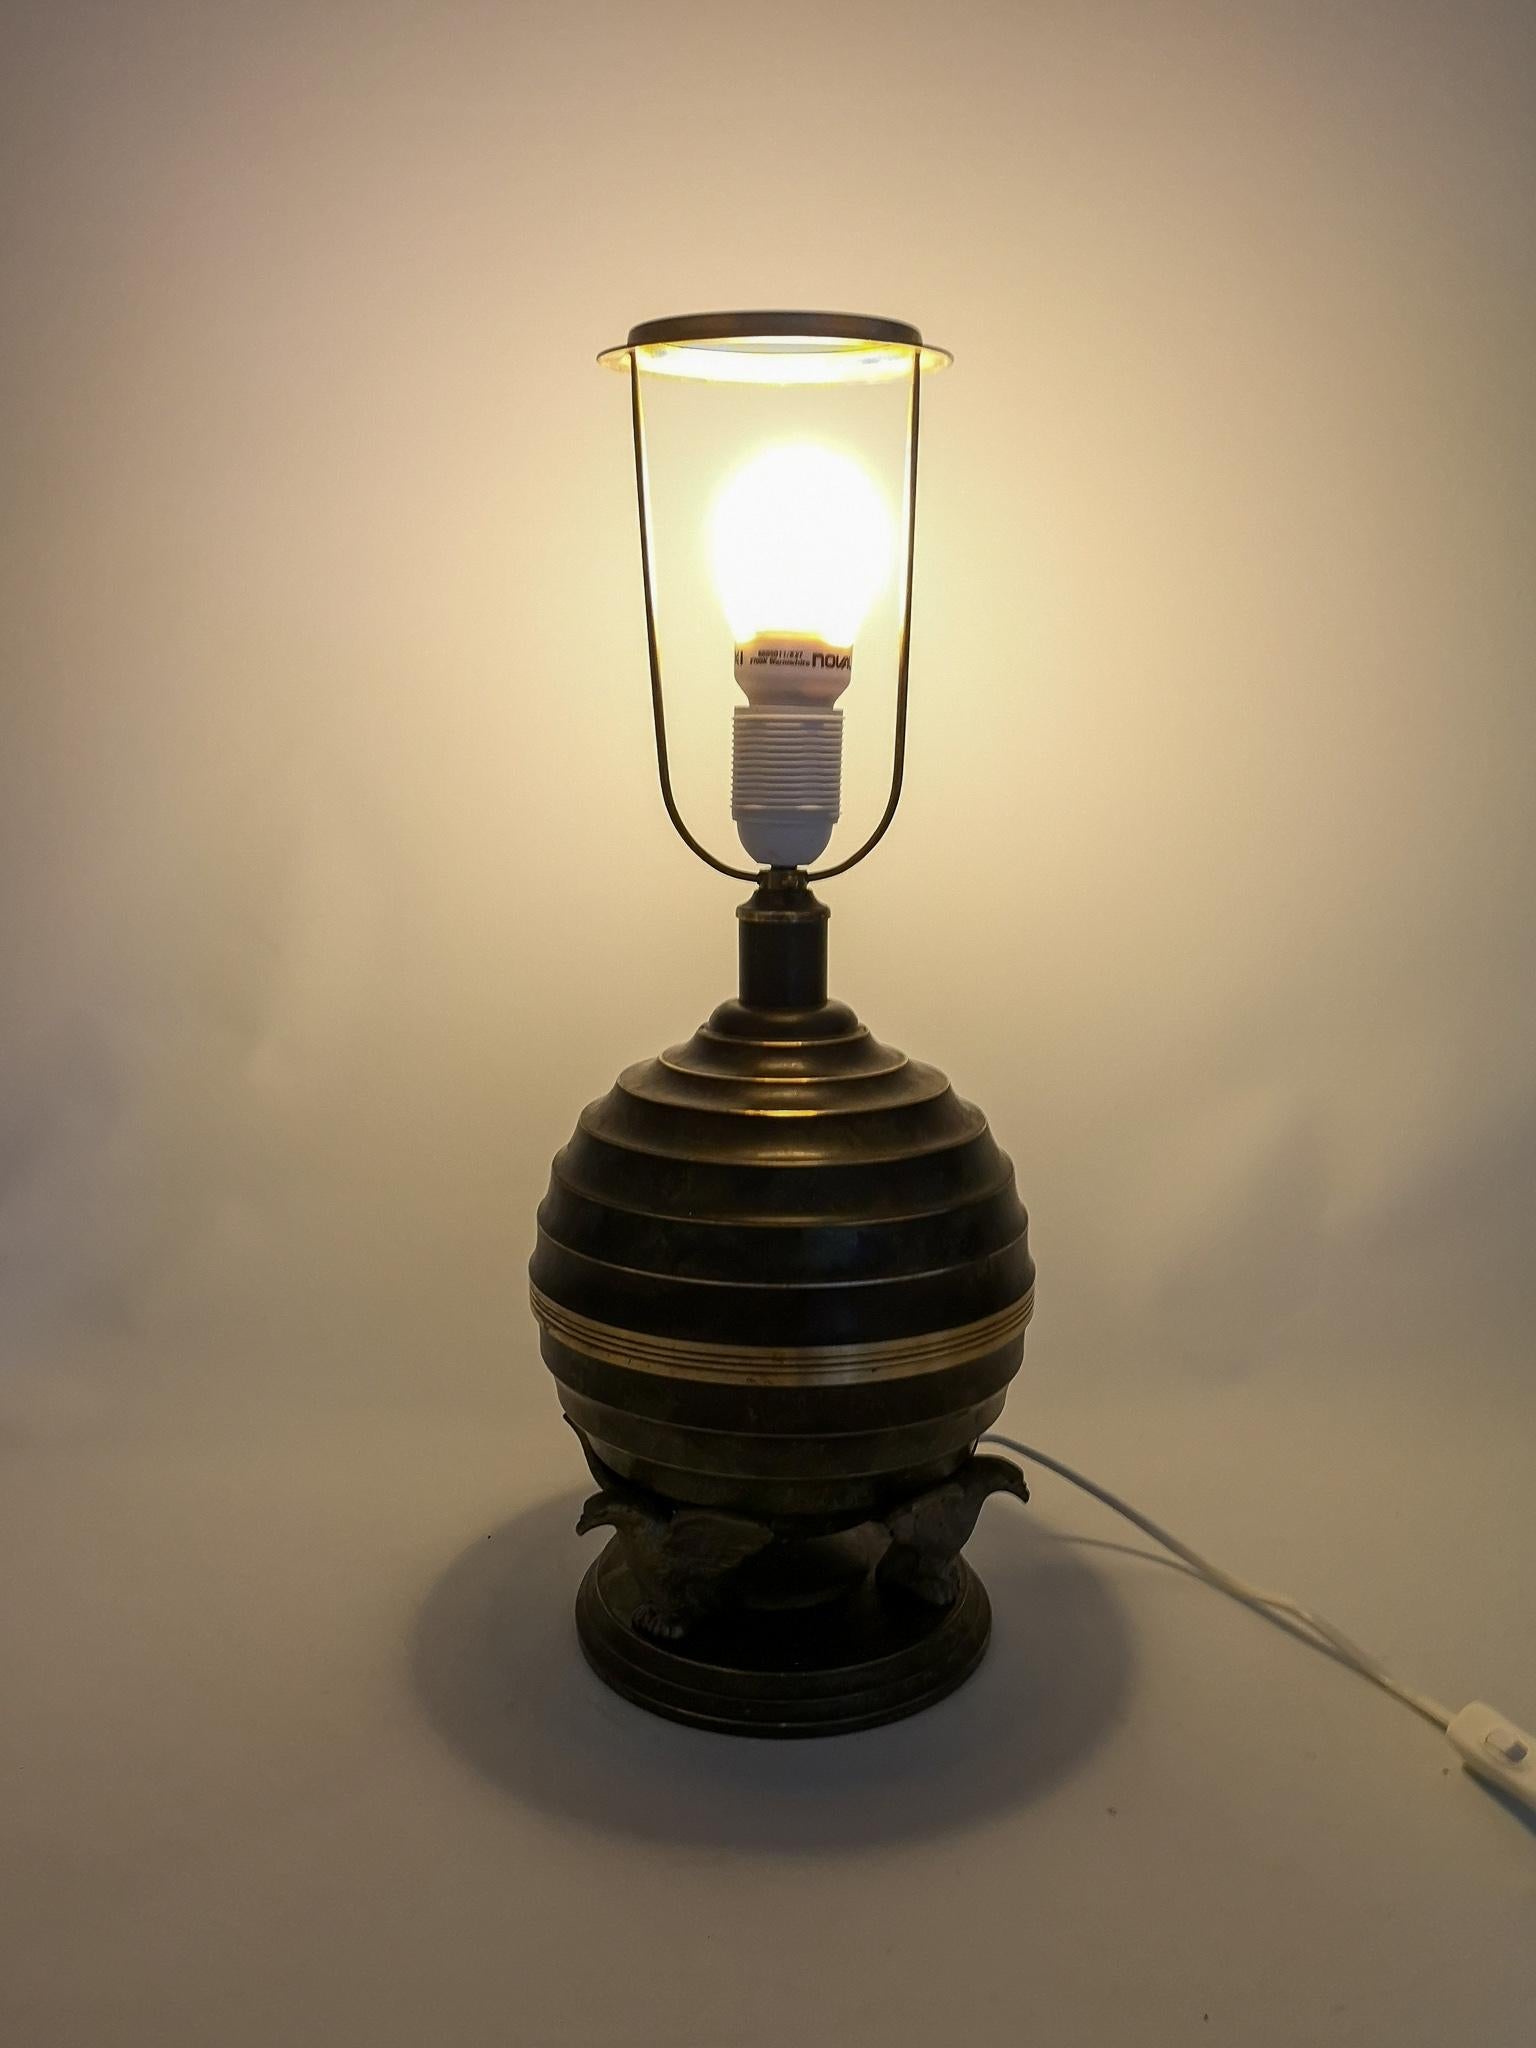  Art Deco Table Lamp in Bronze and Brass by SVM Handarbete Sweden 2